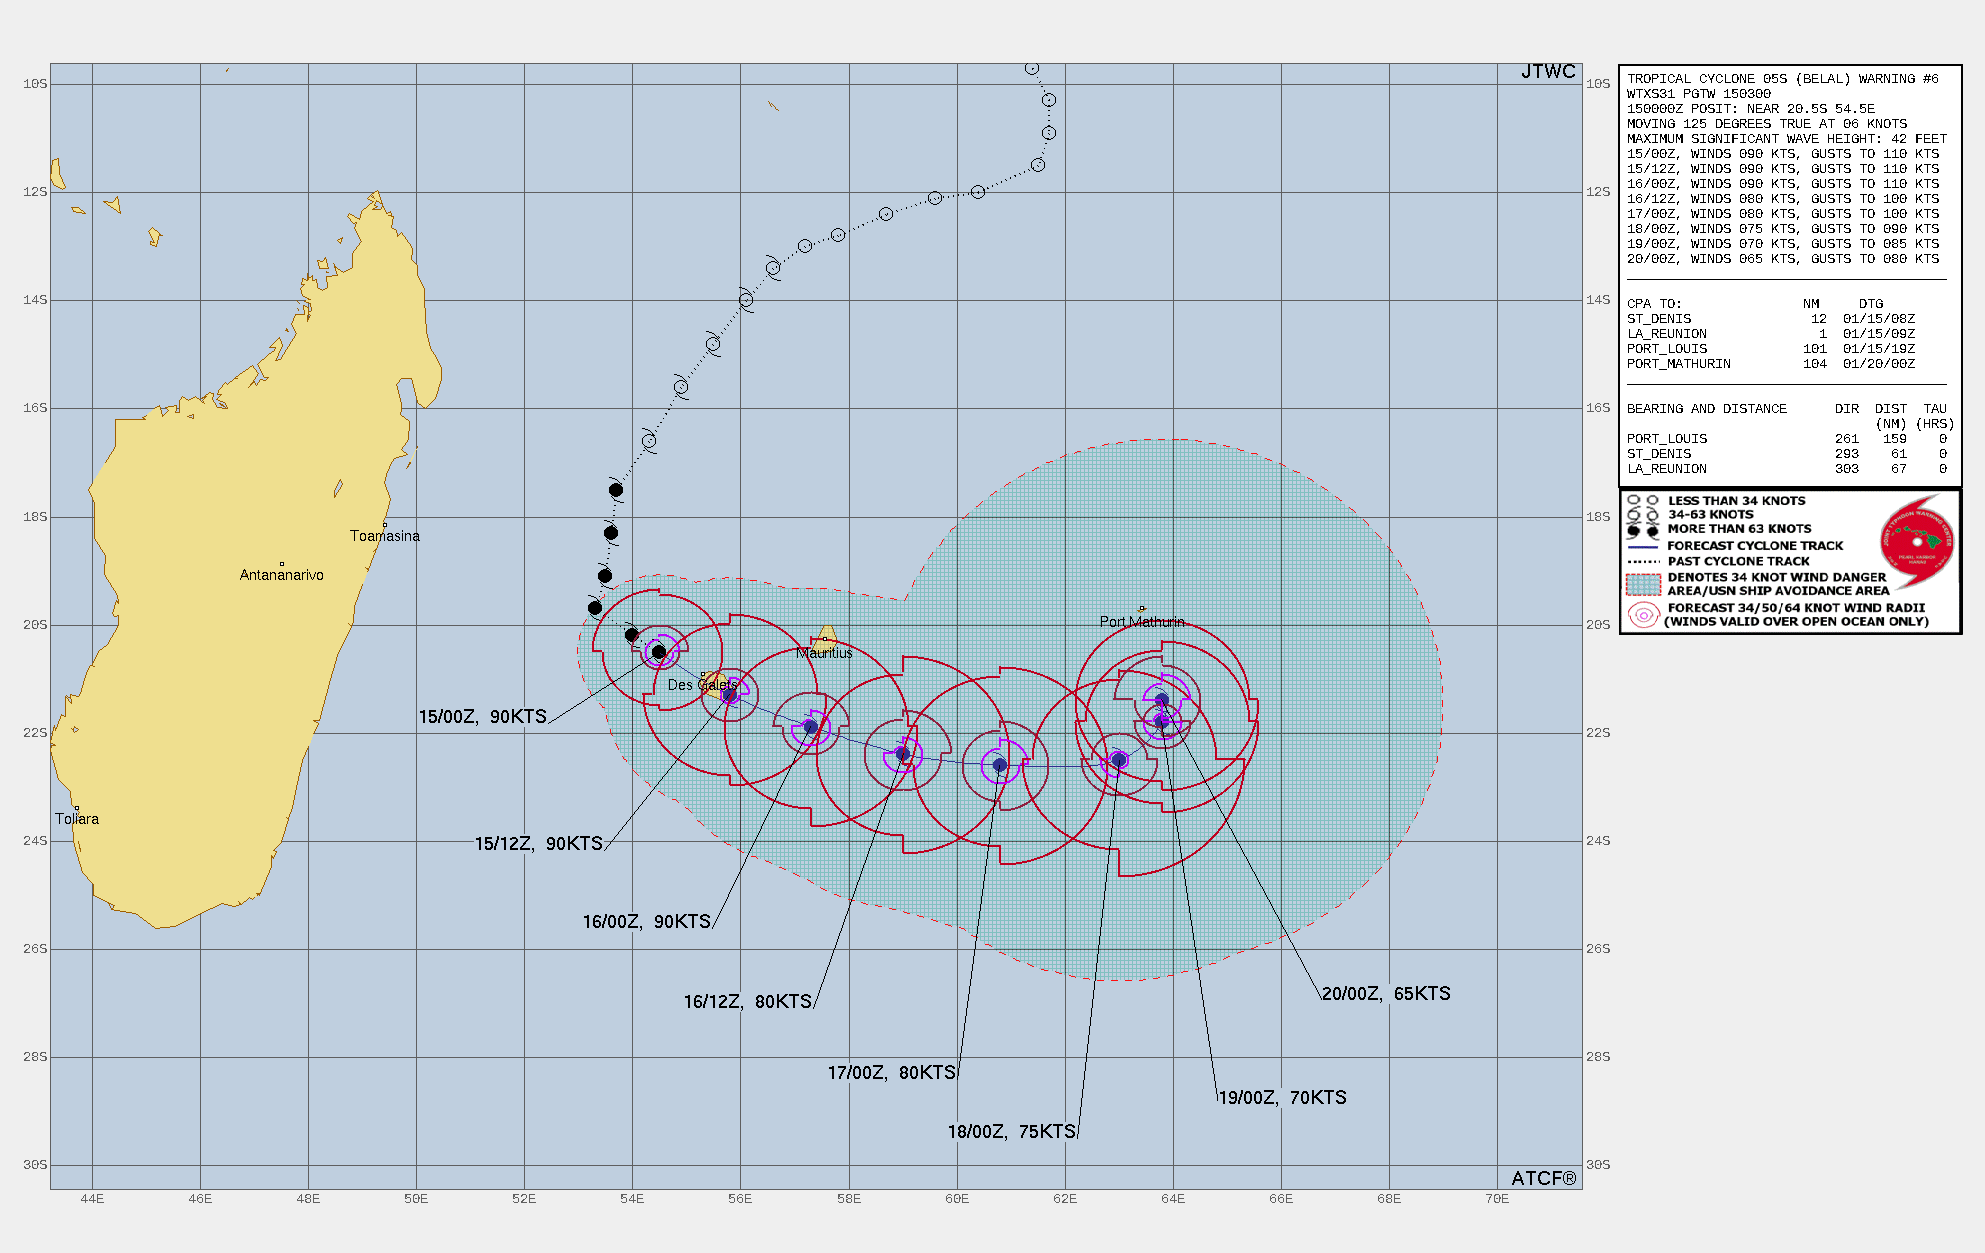 FORECAST REASONING.  SIGNIFICANT FORECAST CHANGES: THERE ARE NO SIGNIFICANT CHANGES TO THE FORECAST FROM THE PREVIOUS WARNING.  FORECAST DISCUSSION: TC 05S IS TRACKING SOUTHEASTWARD TOWARD LA REUNION AND FORECAST TO TURN GENERALLY EAST-SOUTHEASTWARD THROUGHOUT THE FORECAST PERIOD AS THE DEEP-LAYERED SUBTROPICAL RIDGE  (STR) WILL CONTINUE TO STRONGLY INFLUENCE THE MOVEMENT OF THE STORM  UNTIL TAU 96. THE SYSTEM IS NOT EXPECTED TO UNDERGO WEAKENING THROUGH  TAU 24, BUT IS EXPECTED TO MAINTAIN AN INTENSITY OF 90 KTS UNDER  FAVORABLE ENVIRONMENTAL CONDITIONS. BY TAU 36, DRY AIR WILL SLOWLY  WRAP CYCLONICALLY AROUND TC 05S FROM THE WESTERN PERIPHERY. AS THE CYCLONE CONTINUES TO THE SOUTHEAST AND THEN THE EAST-SOUTHEAST, A  SLOW AND STEADY WEAKENING IS FORECAST UNTIL TAU 72 DUE TO INCREASING VERTICAL WIND SHEAR (VWS) AND DRY AIR ENTRAINMENT. AFTER TAU 72, TC 05S IS EXPECTED TO SLOW SIGNIFICANTLY AND BECOME QUASI-STATIONARY WITH  THE WELL-ESTABLISHED STR TO THE WEST AND EAST.